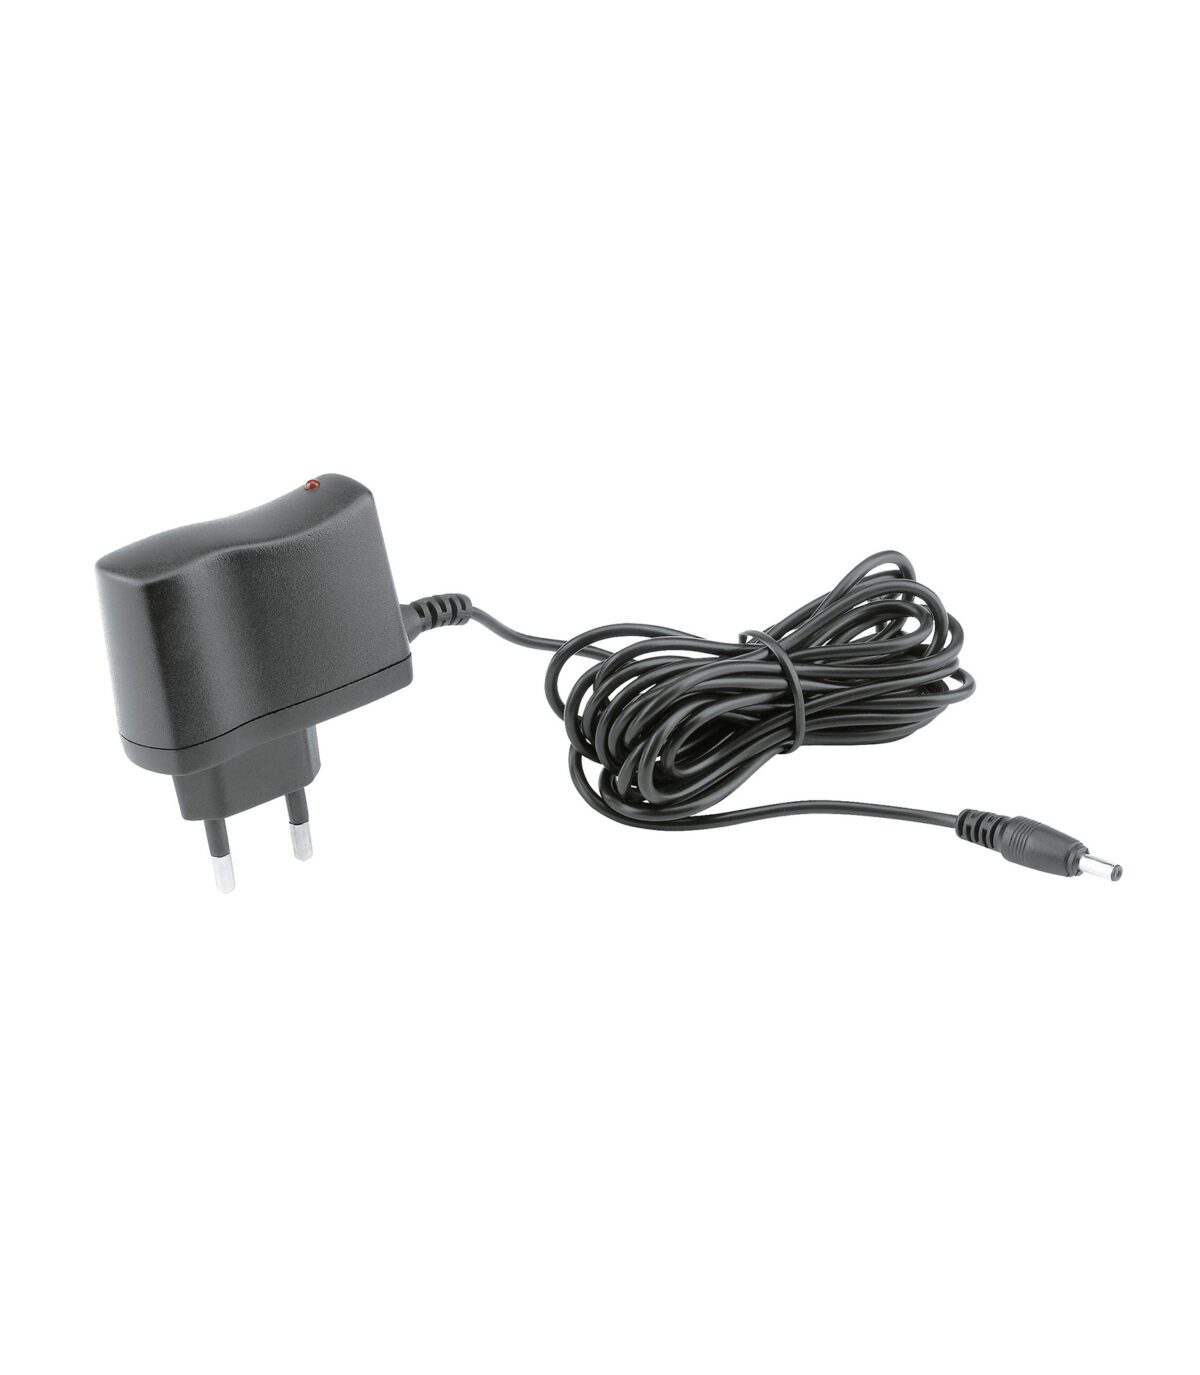 K&M AC Adapter For 12270,85670 & 85675 Lights